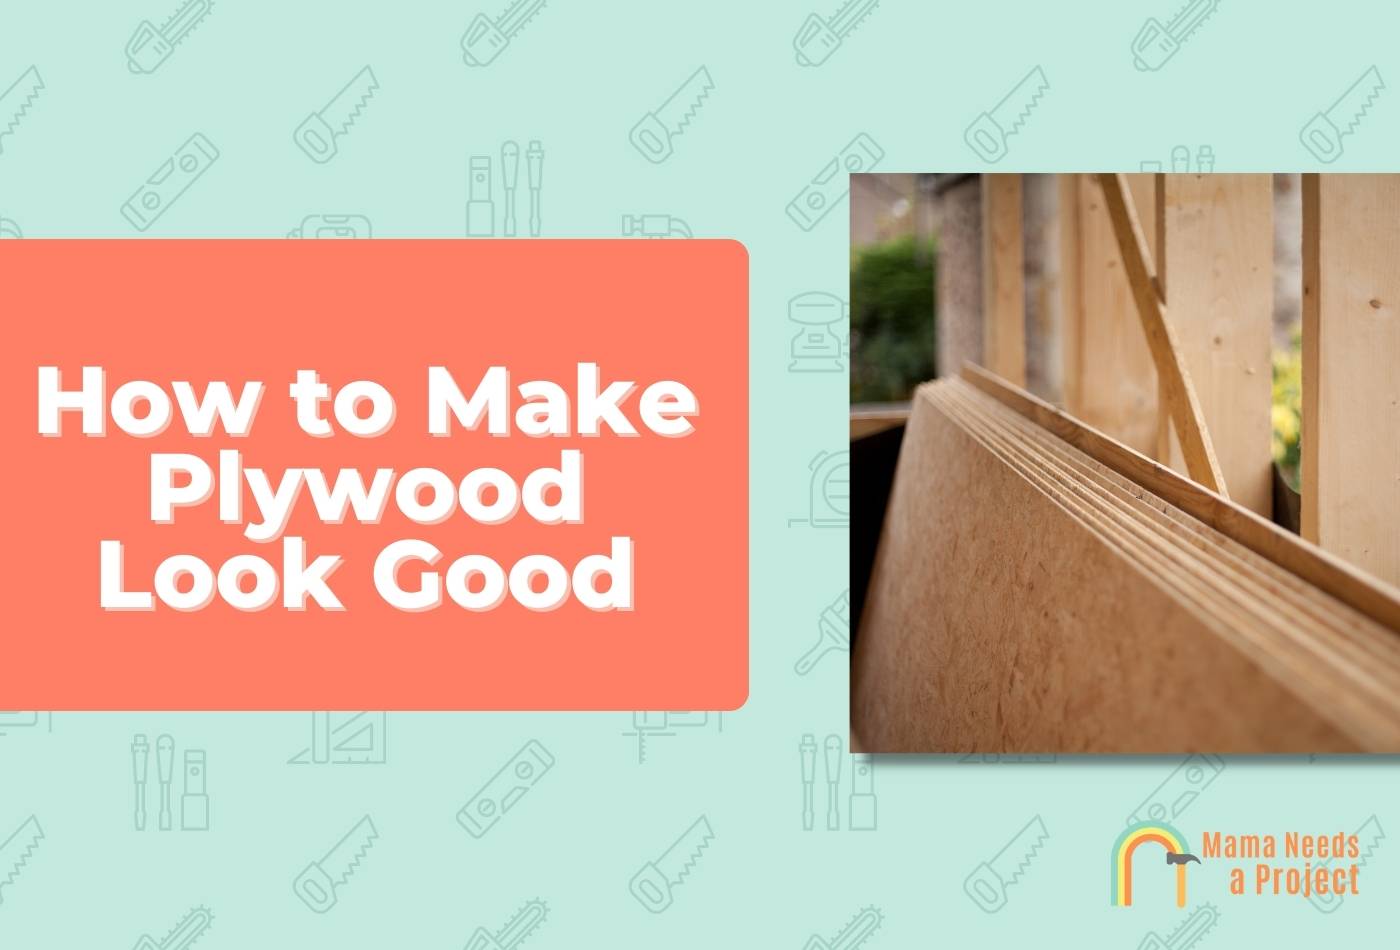 How to Make Plywood Look Good